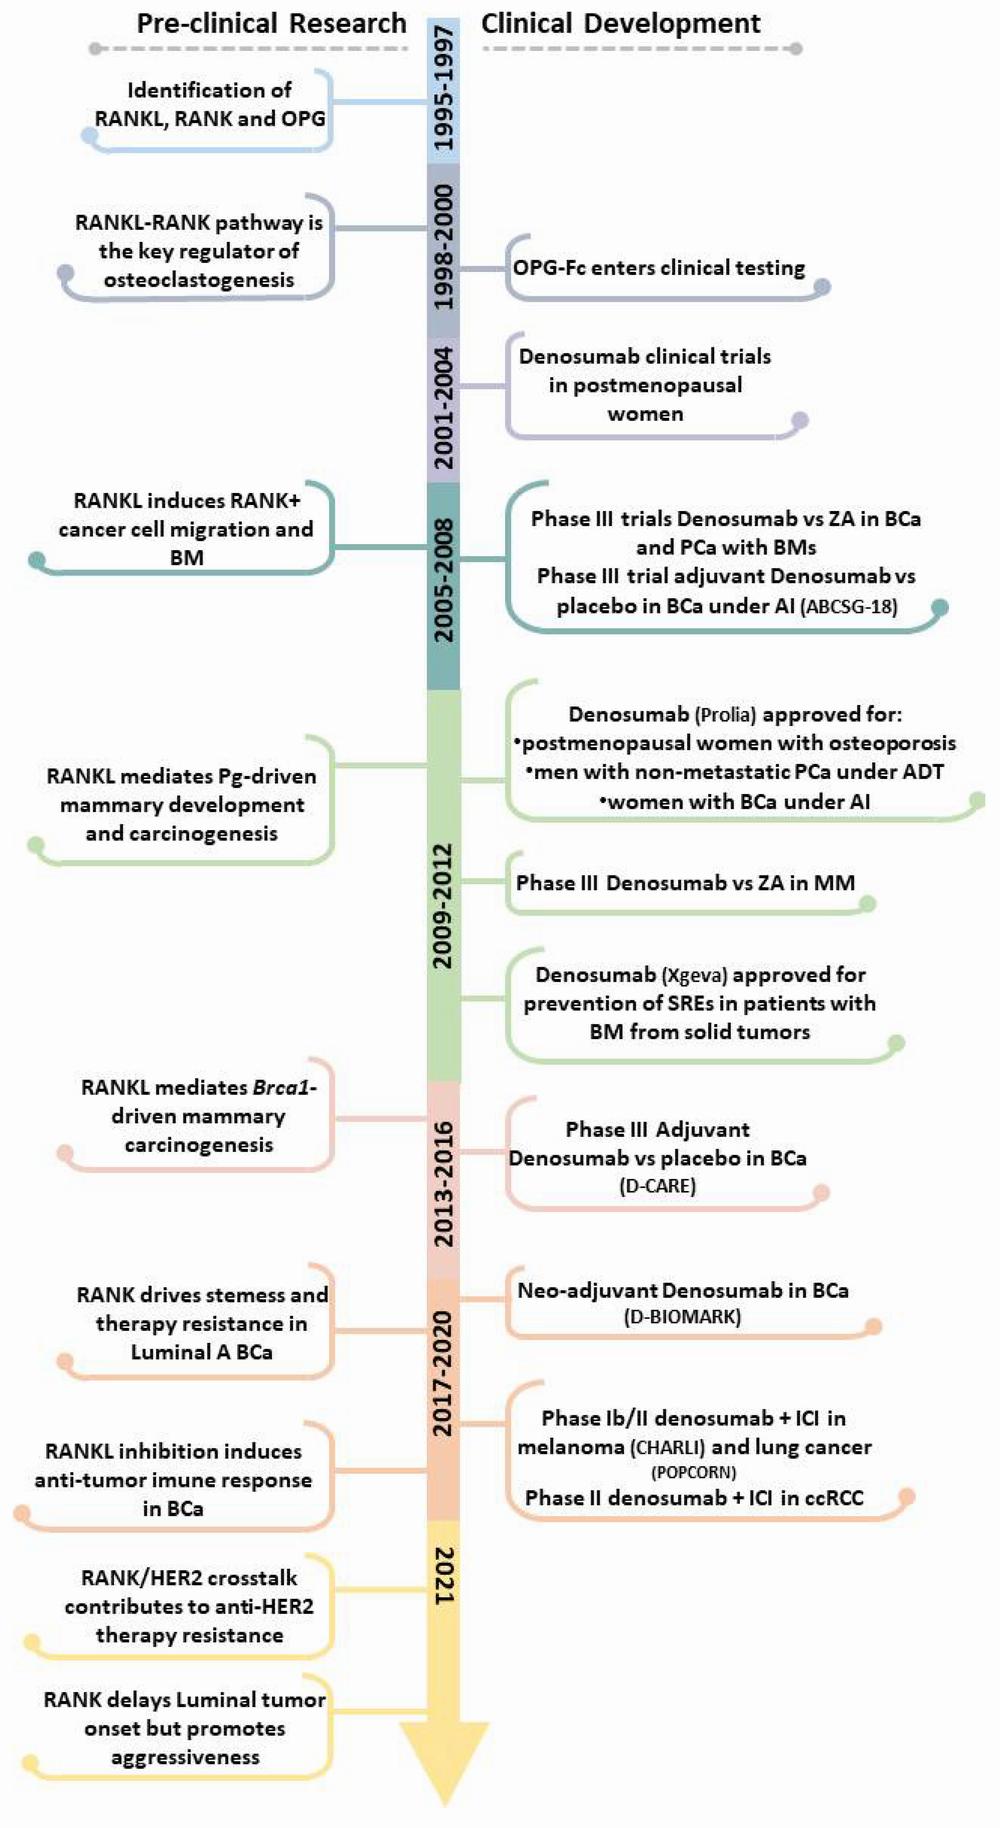 A timeline of the development of denosumab, a RANKL inhibitor, from preclinical research to clinical development.